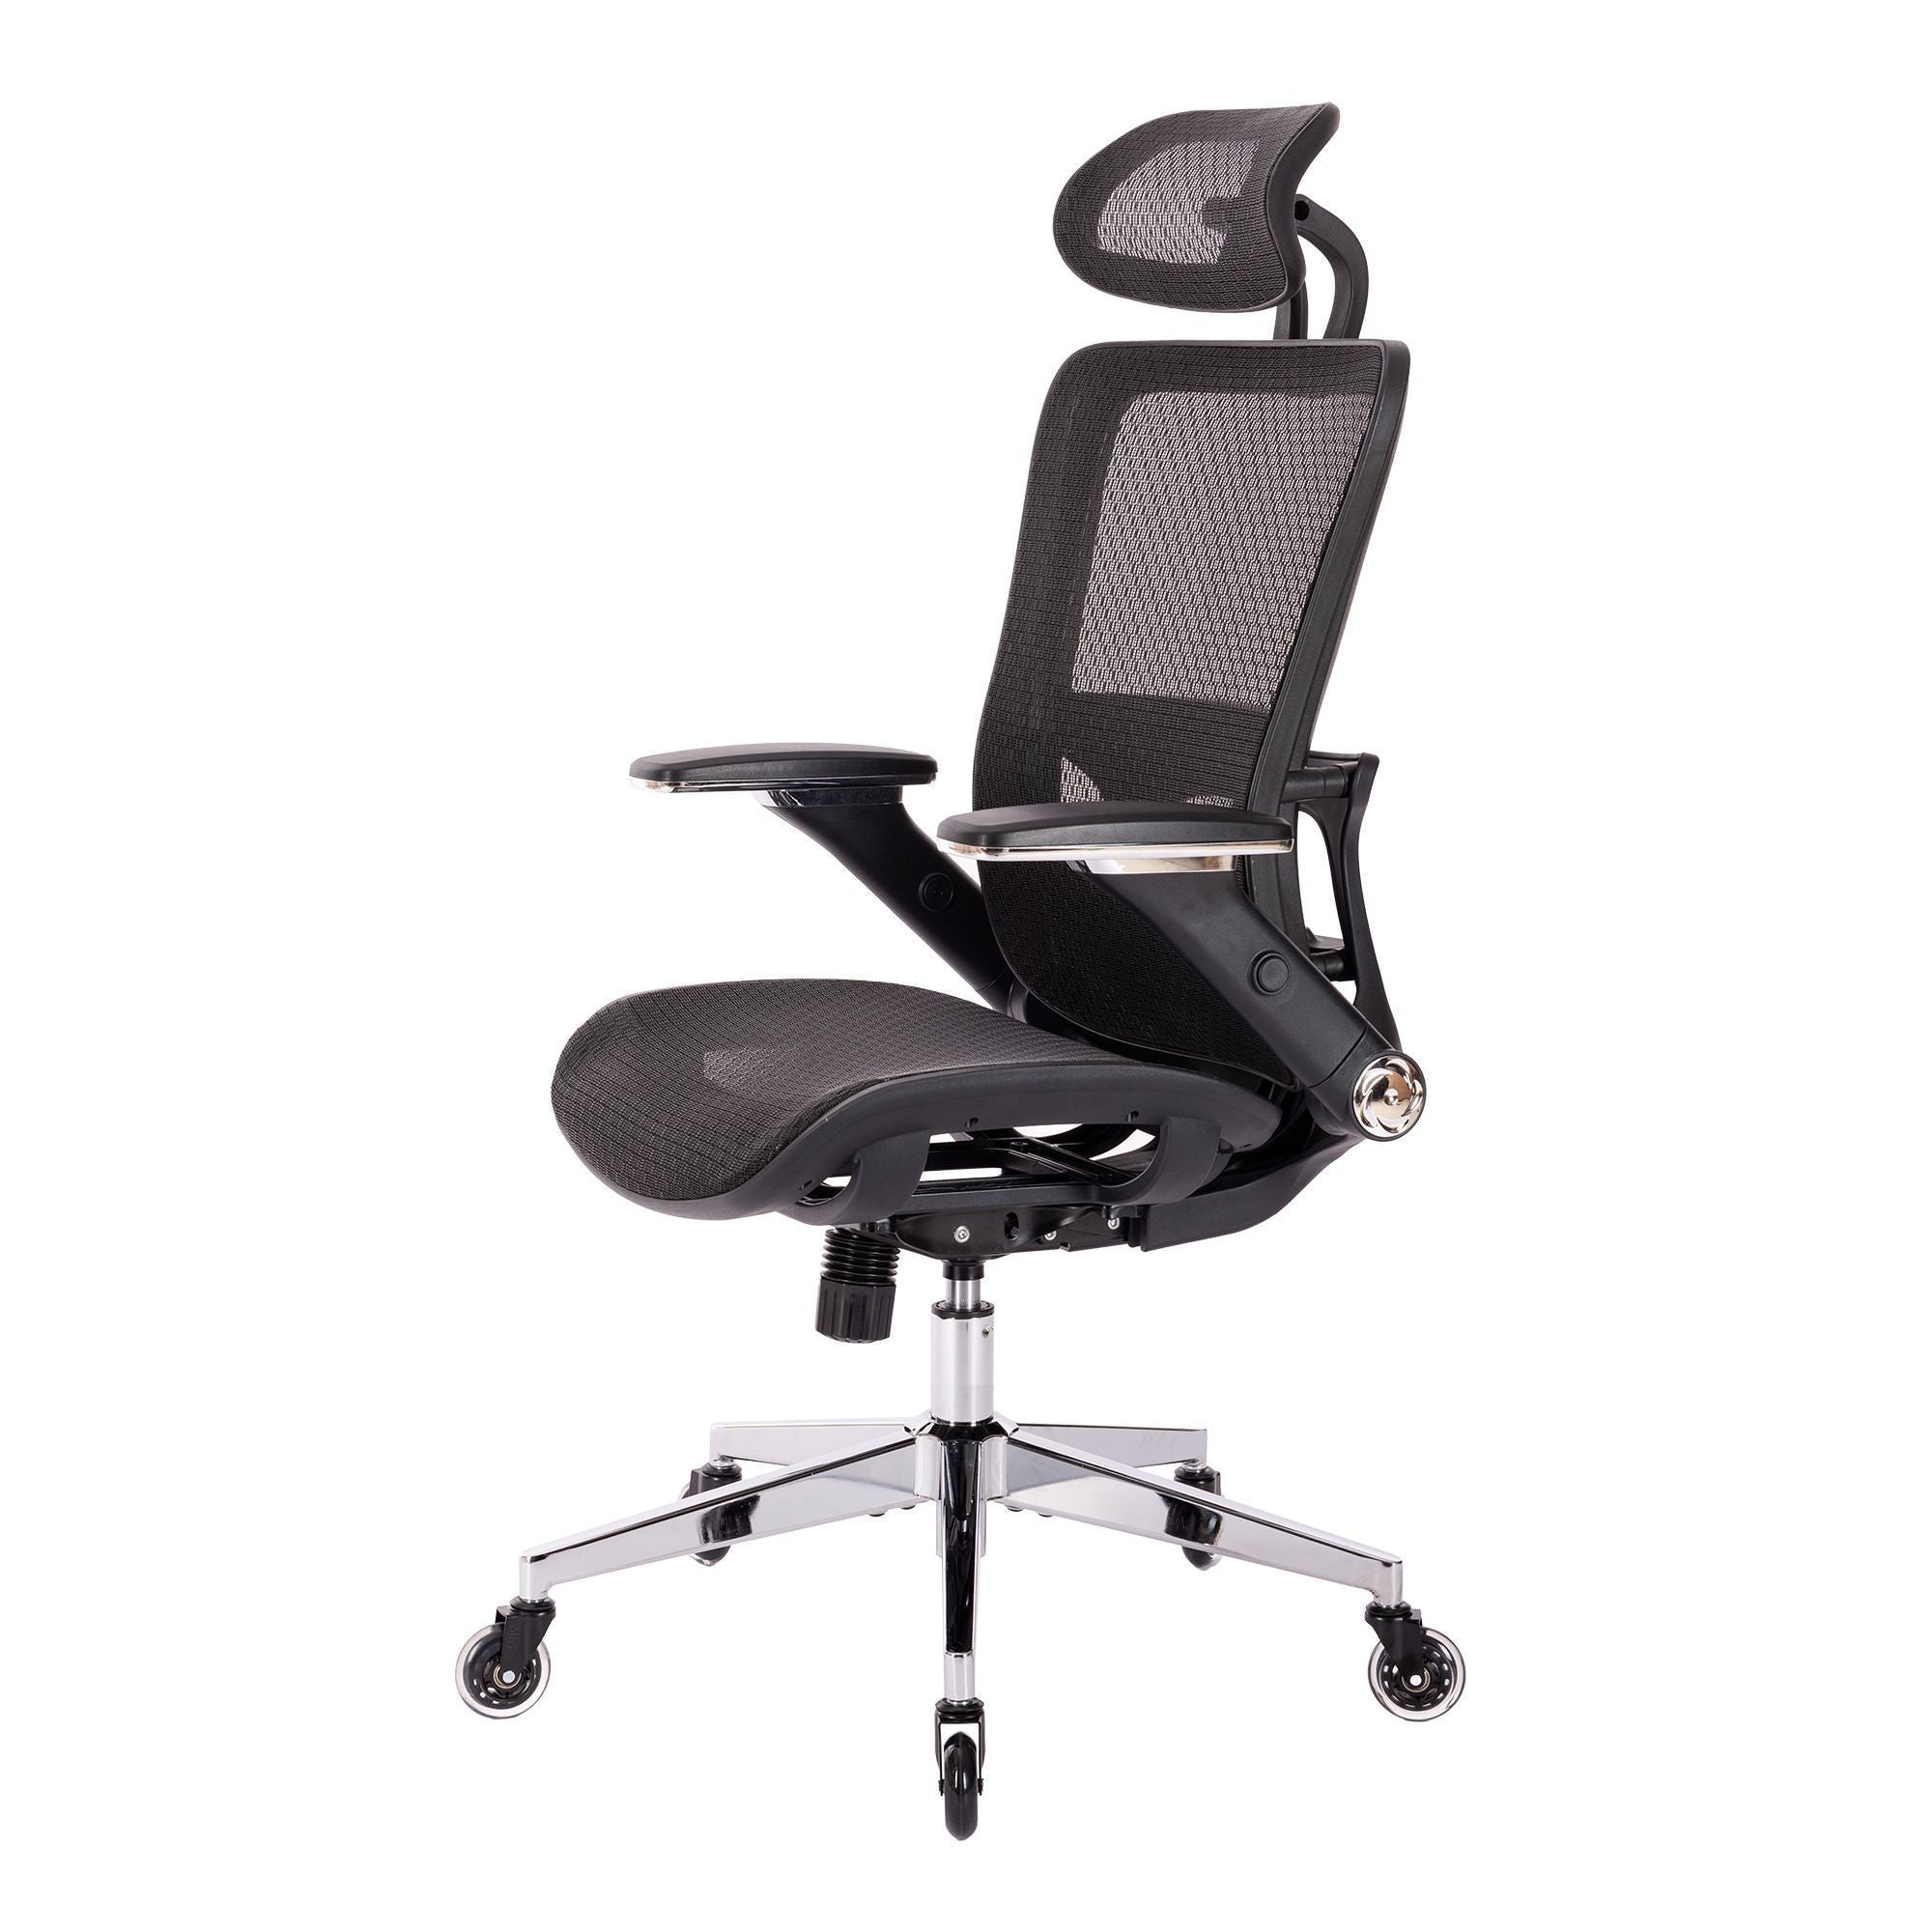 Black Ergonomic Mesh Office Chair, High Back - Adjustable Headrest with Flip-Up Arms, Tilt and lock Function, Lumbar Support and blade Wheels